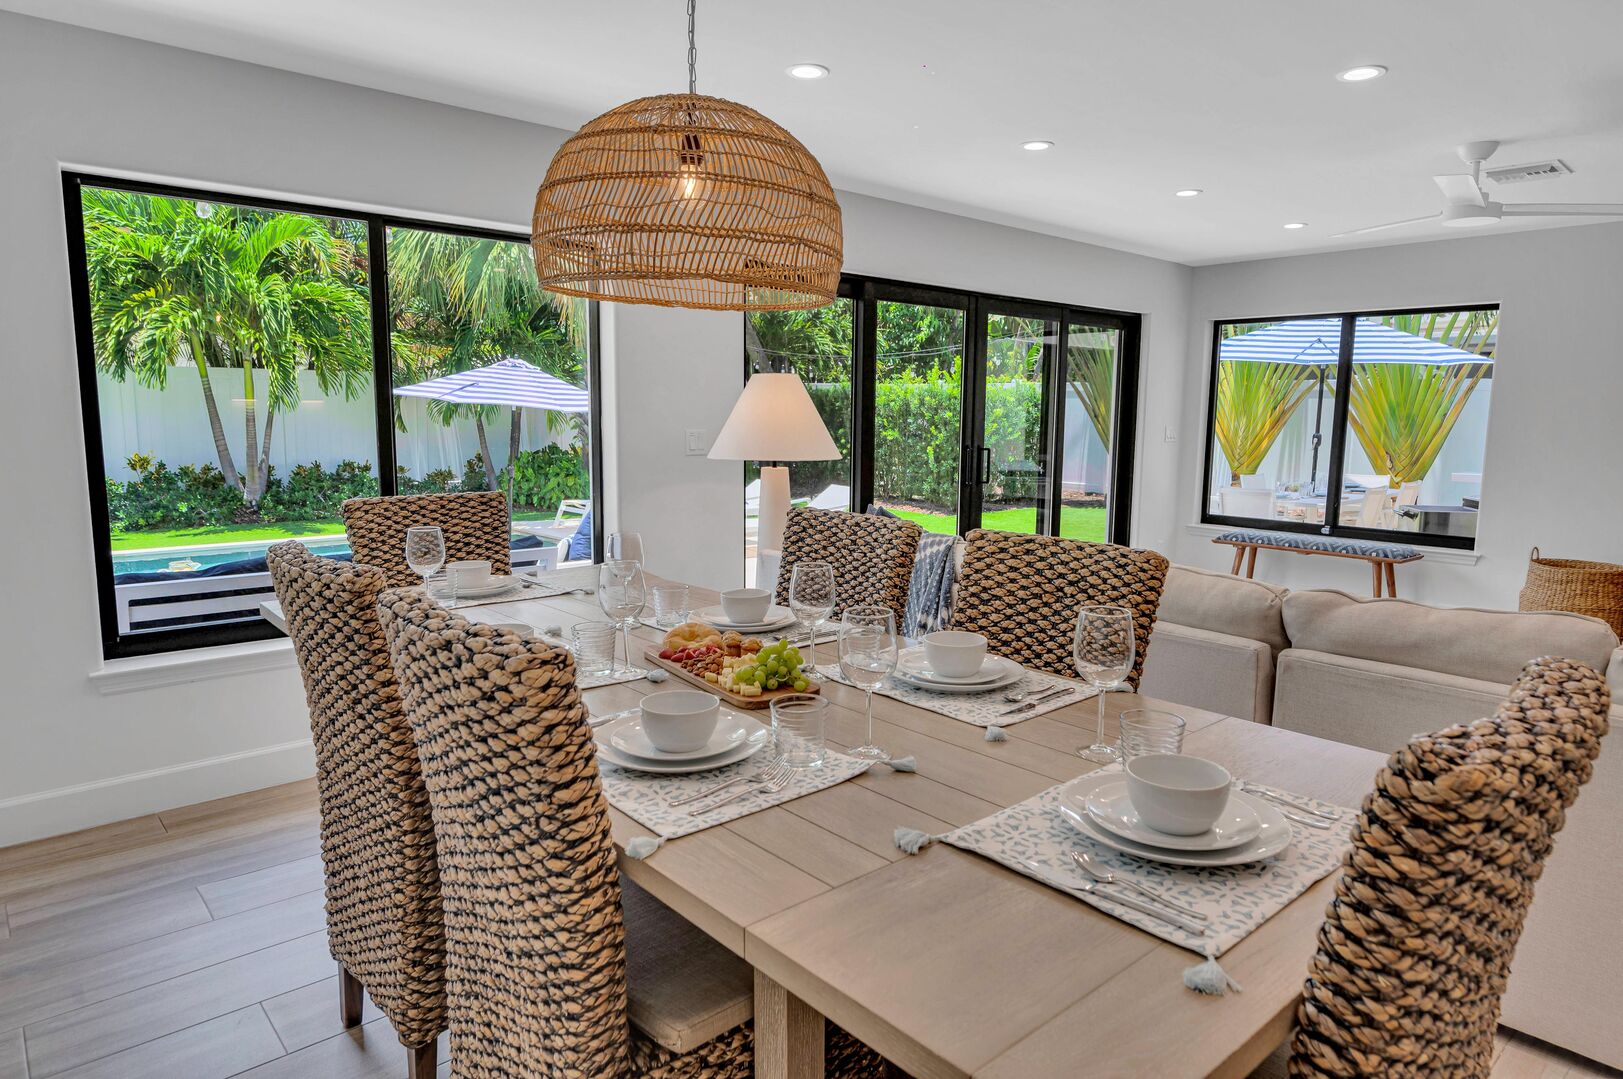 Dining table fit for eight overlooking the tropical garden which features a heated pool.